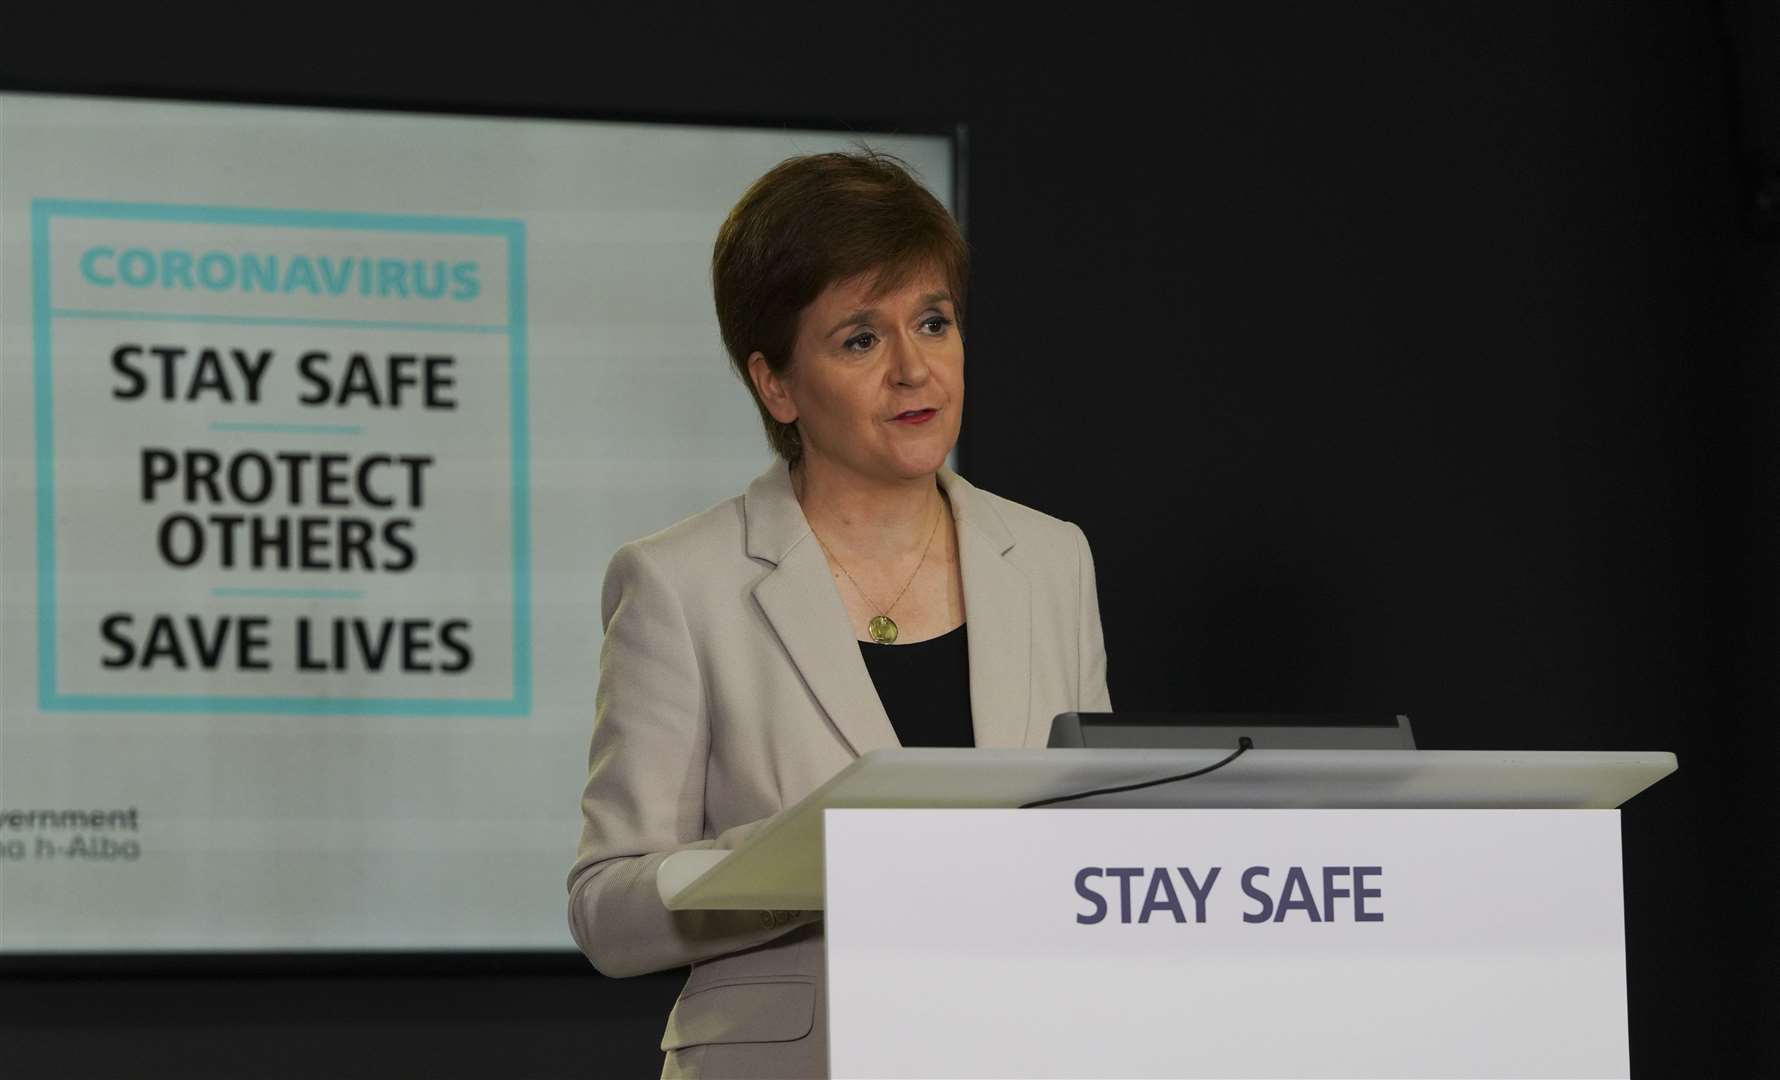 Nicola Sturgeon outlined support for Scotland’s arts and culture sector.